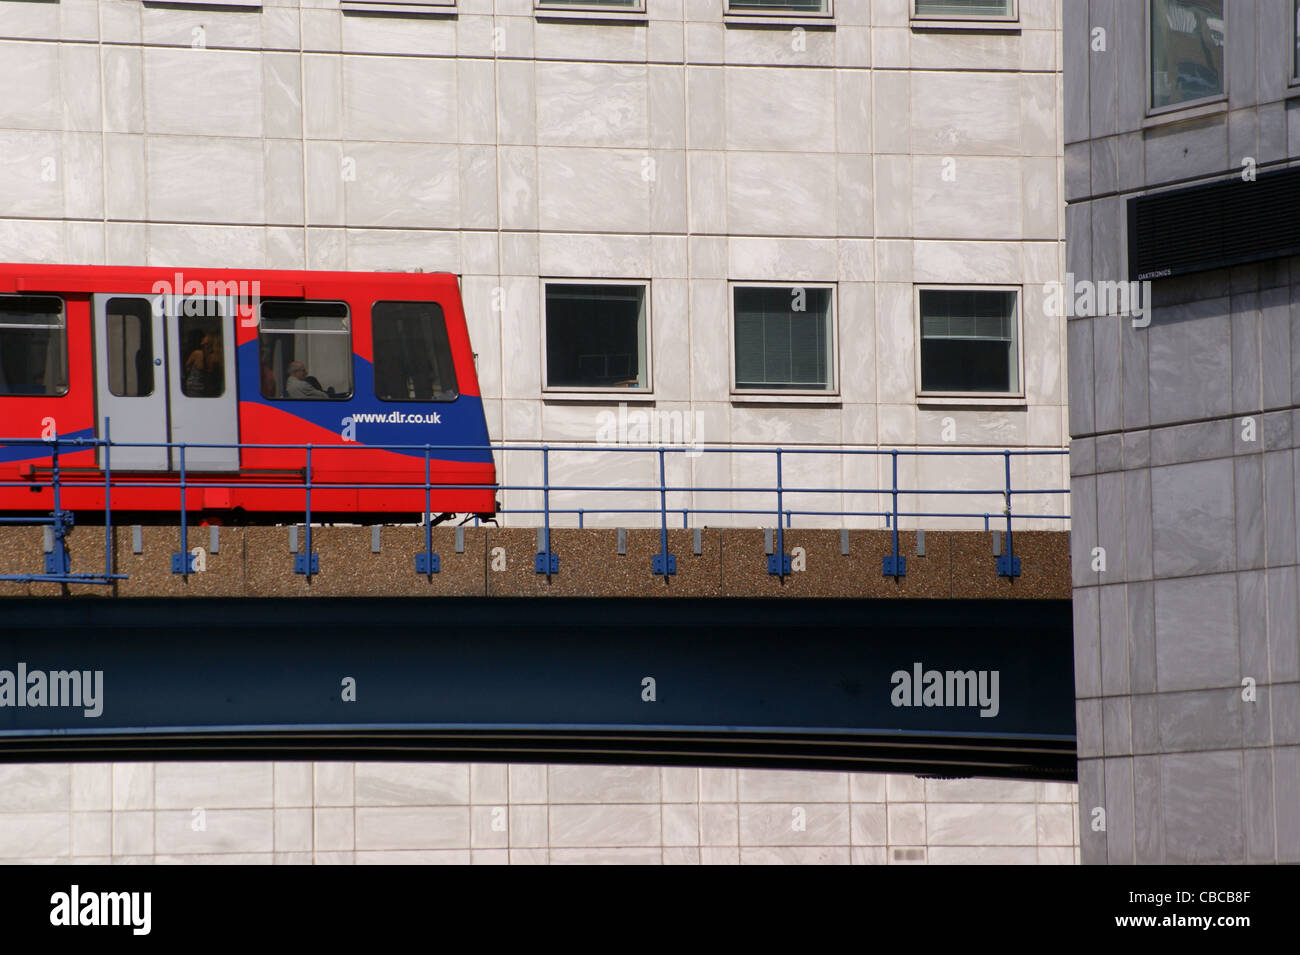 DLR Docklands Light railway train on an elevated track, Canary Wharf, Docklands, London, England Stock Photo